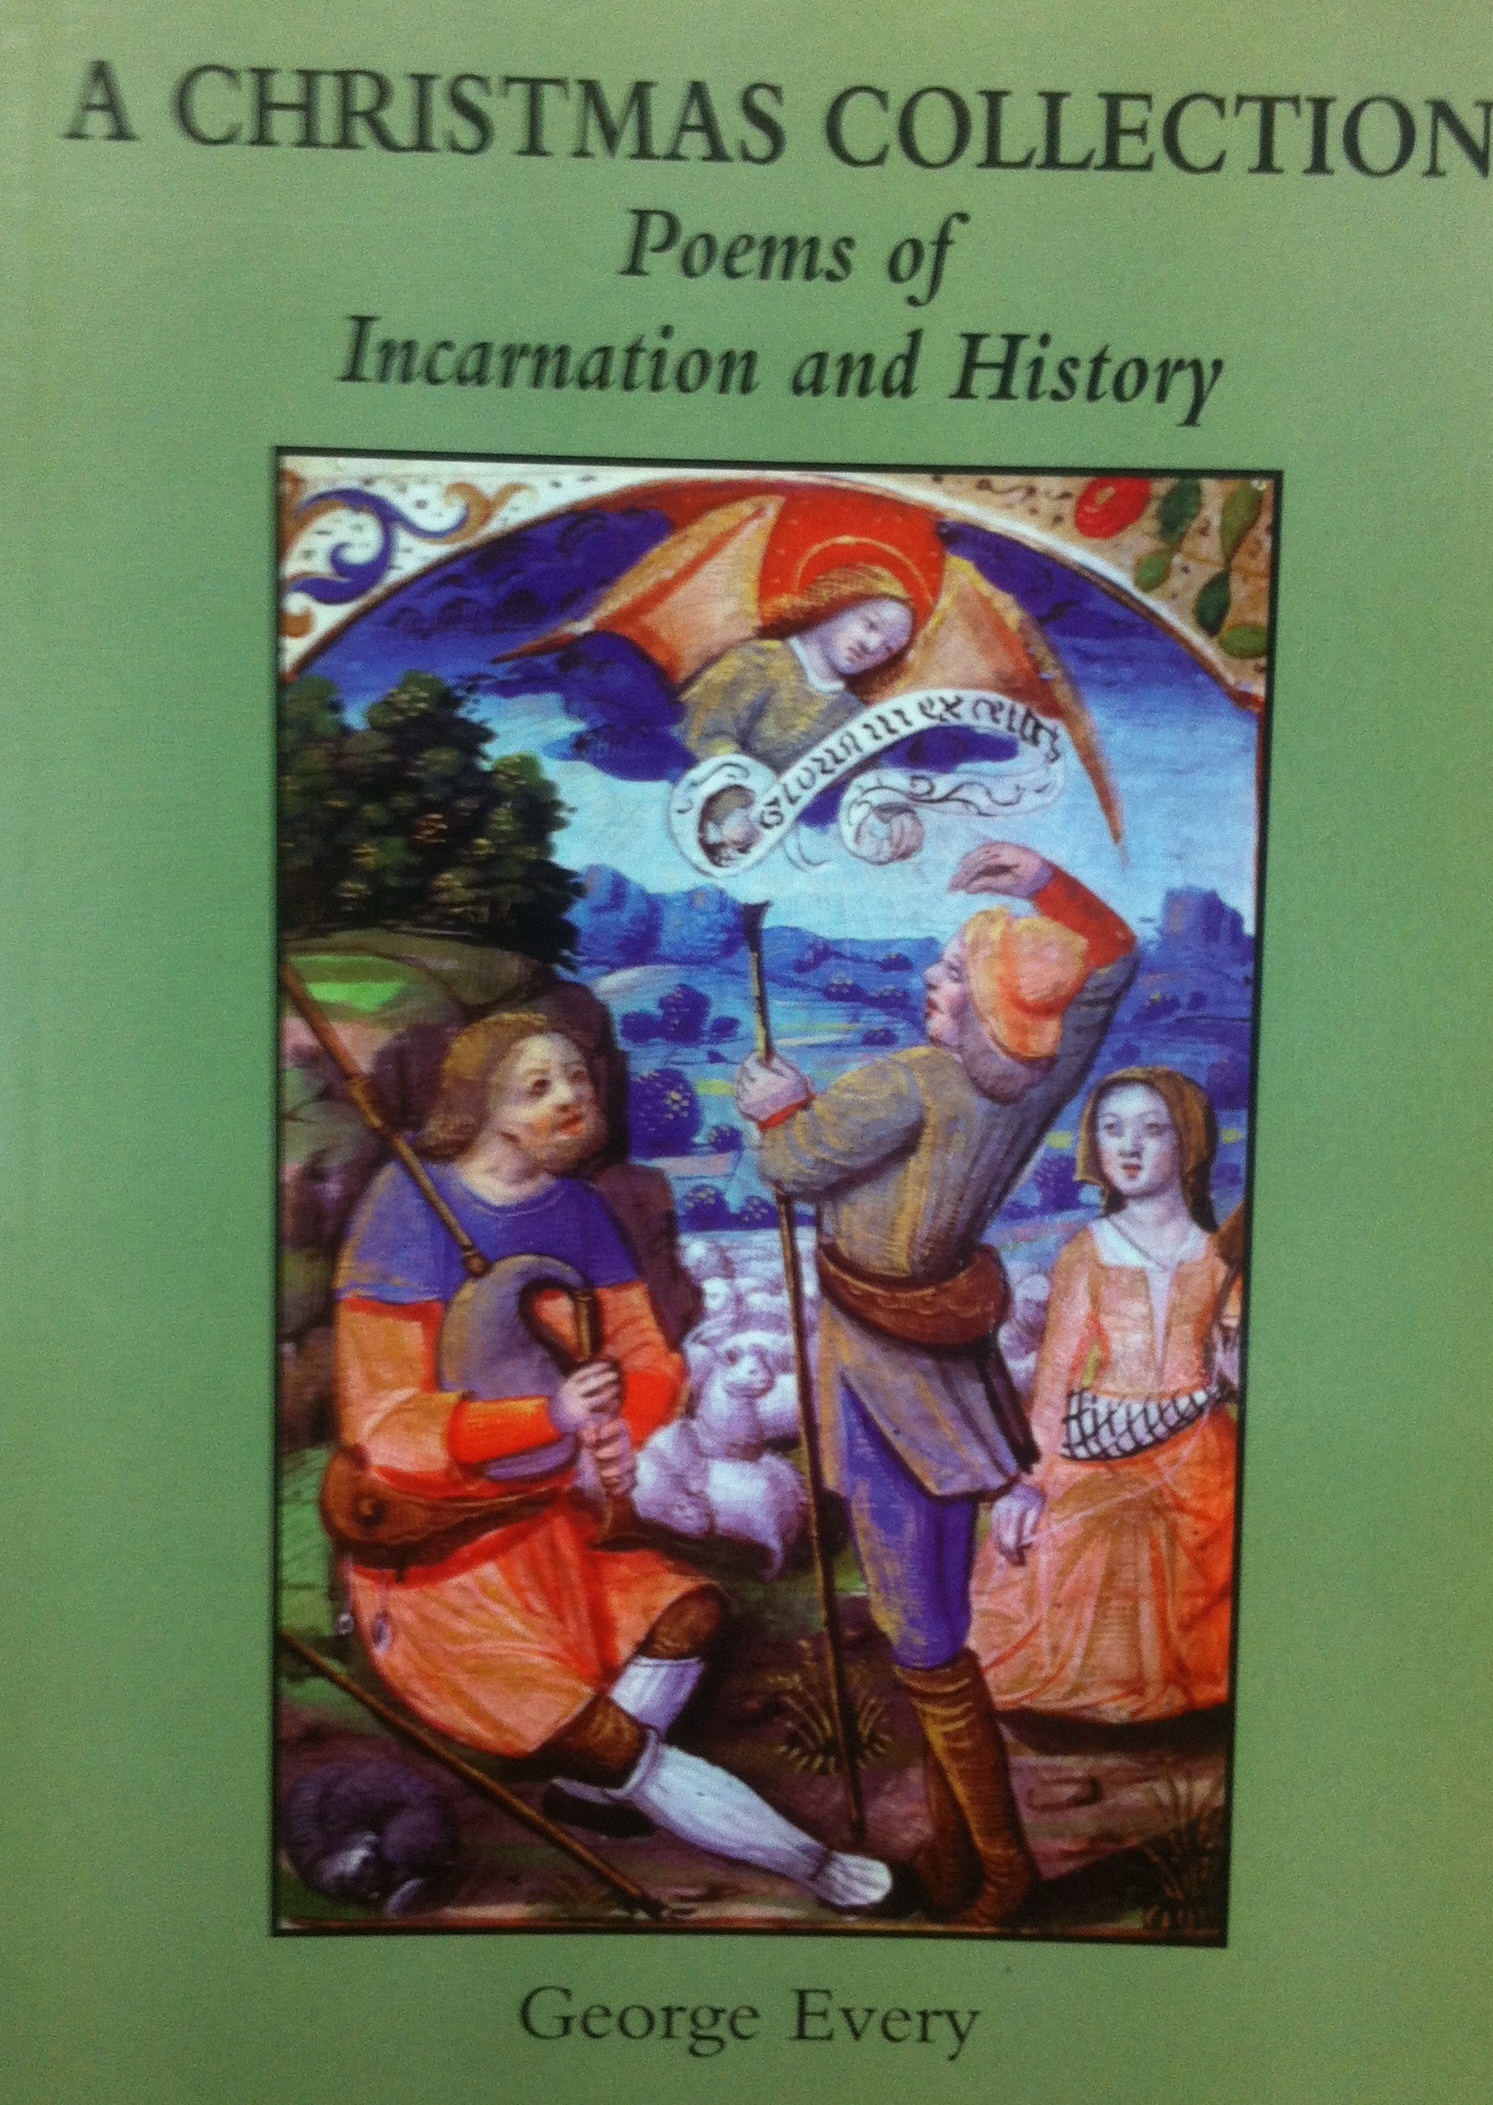 A Christmas Collection: Poems in Incarnation and History / George Every